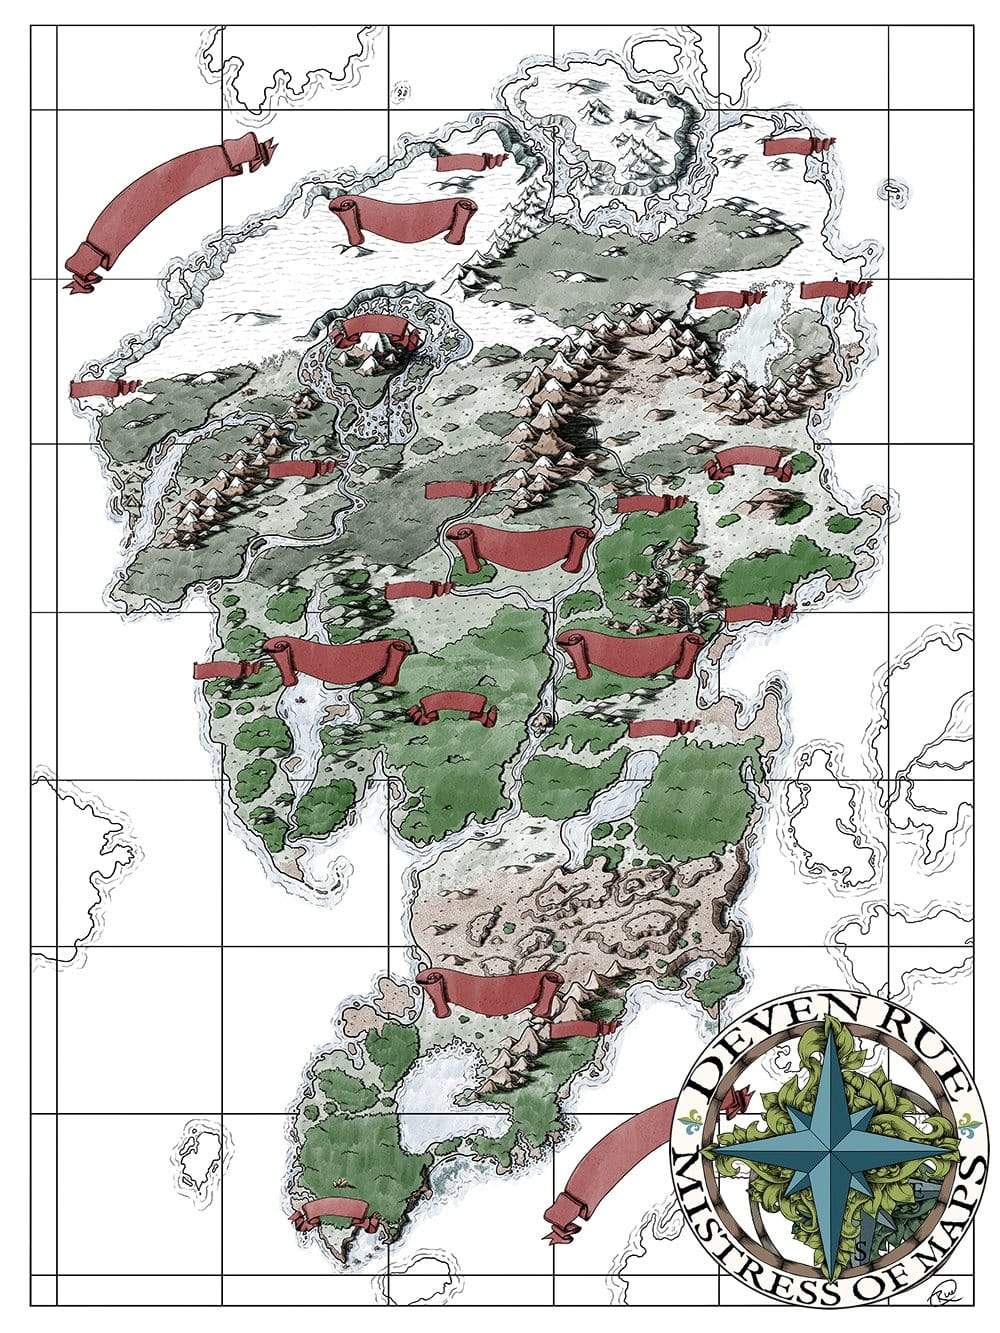 A preview of the Ayon printed prop map 36x27" color version without text by Deven Rue.